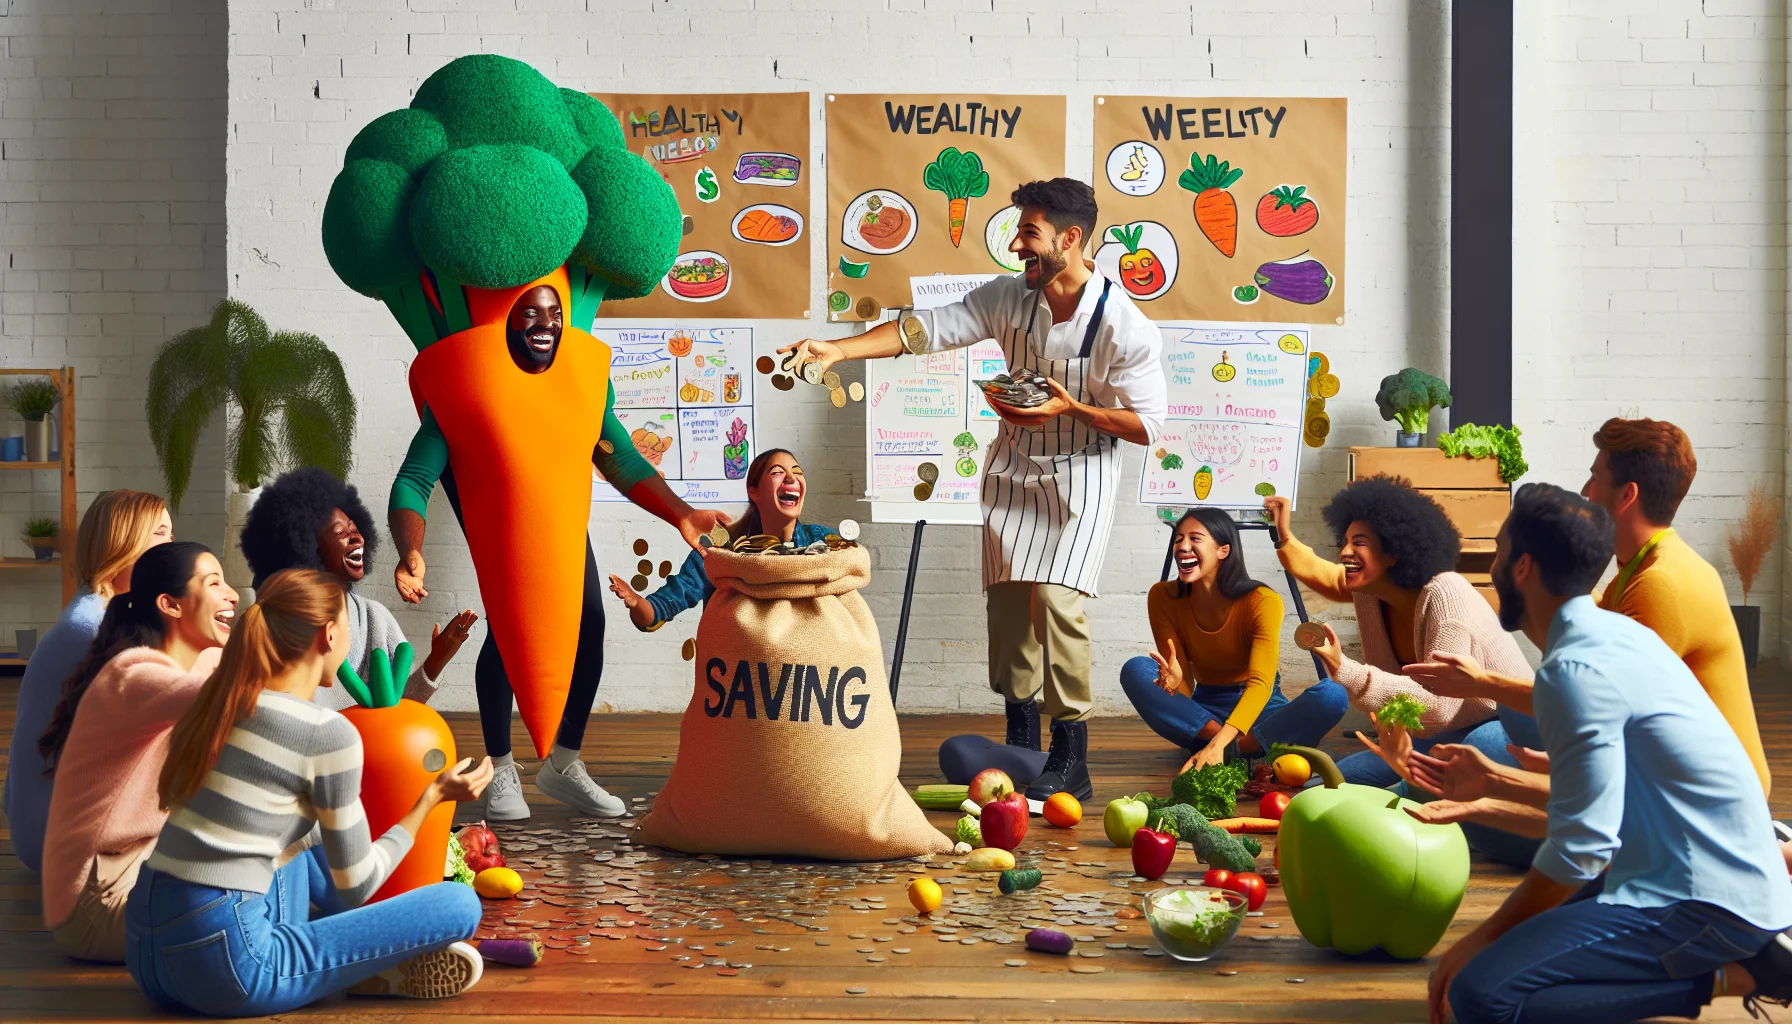 Visualize a vibrant, playful, and humorous scene hosting a Weekly Health and Wellness Discussion. A diverse mix of individuals participate; an Hispanic man dressed as a carrot, a Middle-Eastern woman dressed as an apple, a Black woman holding a giant broccoli scepter, and a Caucasian man flipping coins into a sack labeled 'savings' all circulate in an open space filled with charts and posters about budget-friendly healthy eating. Everyone is laughing, engaging in conversations, and sharing healthy, cost-effective recipes. The energy is palpable and the room is filled with the spirit of well-being and mindful spending.